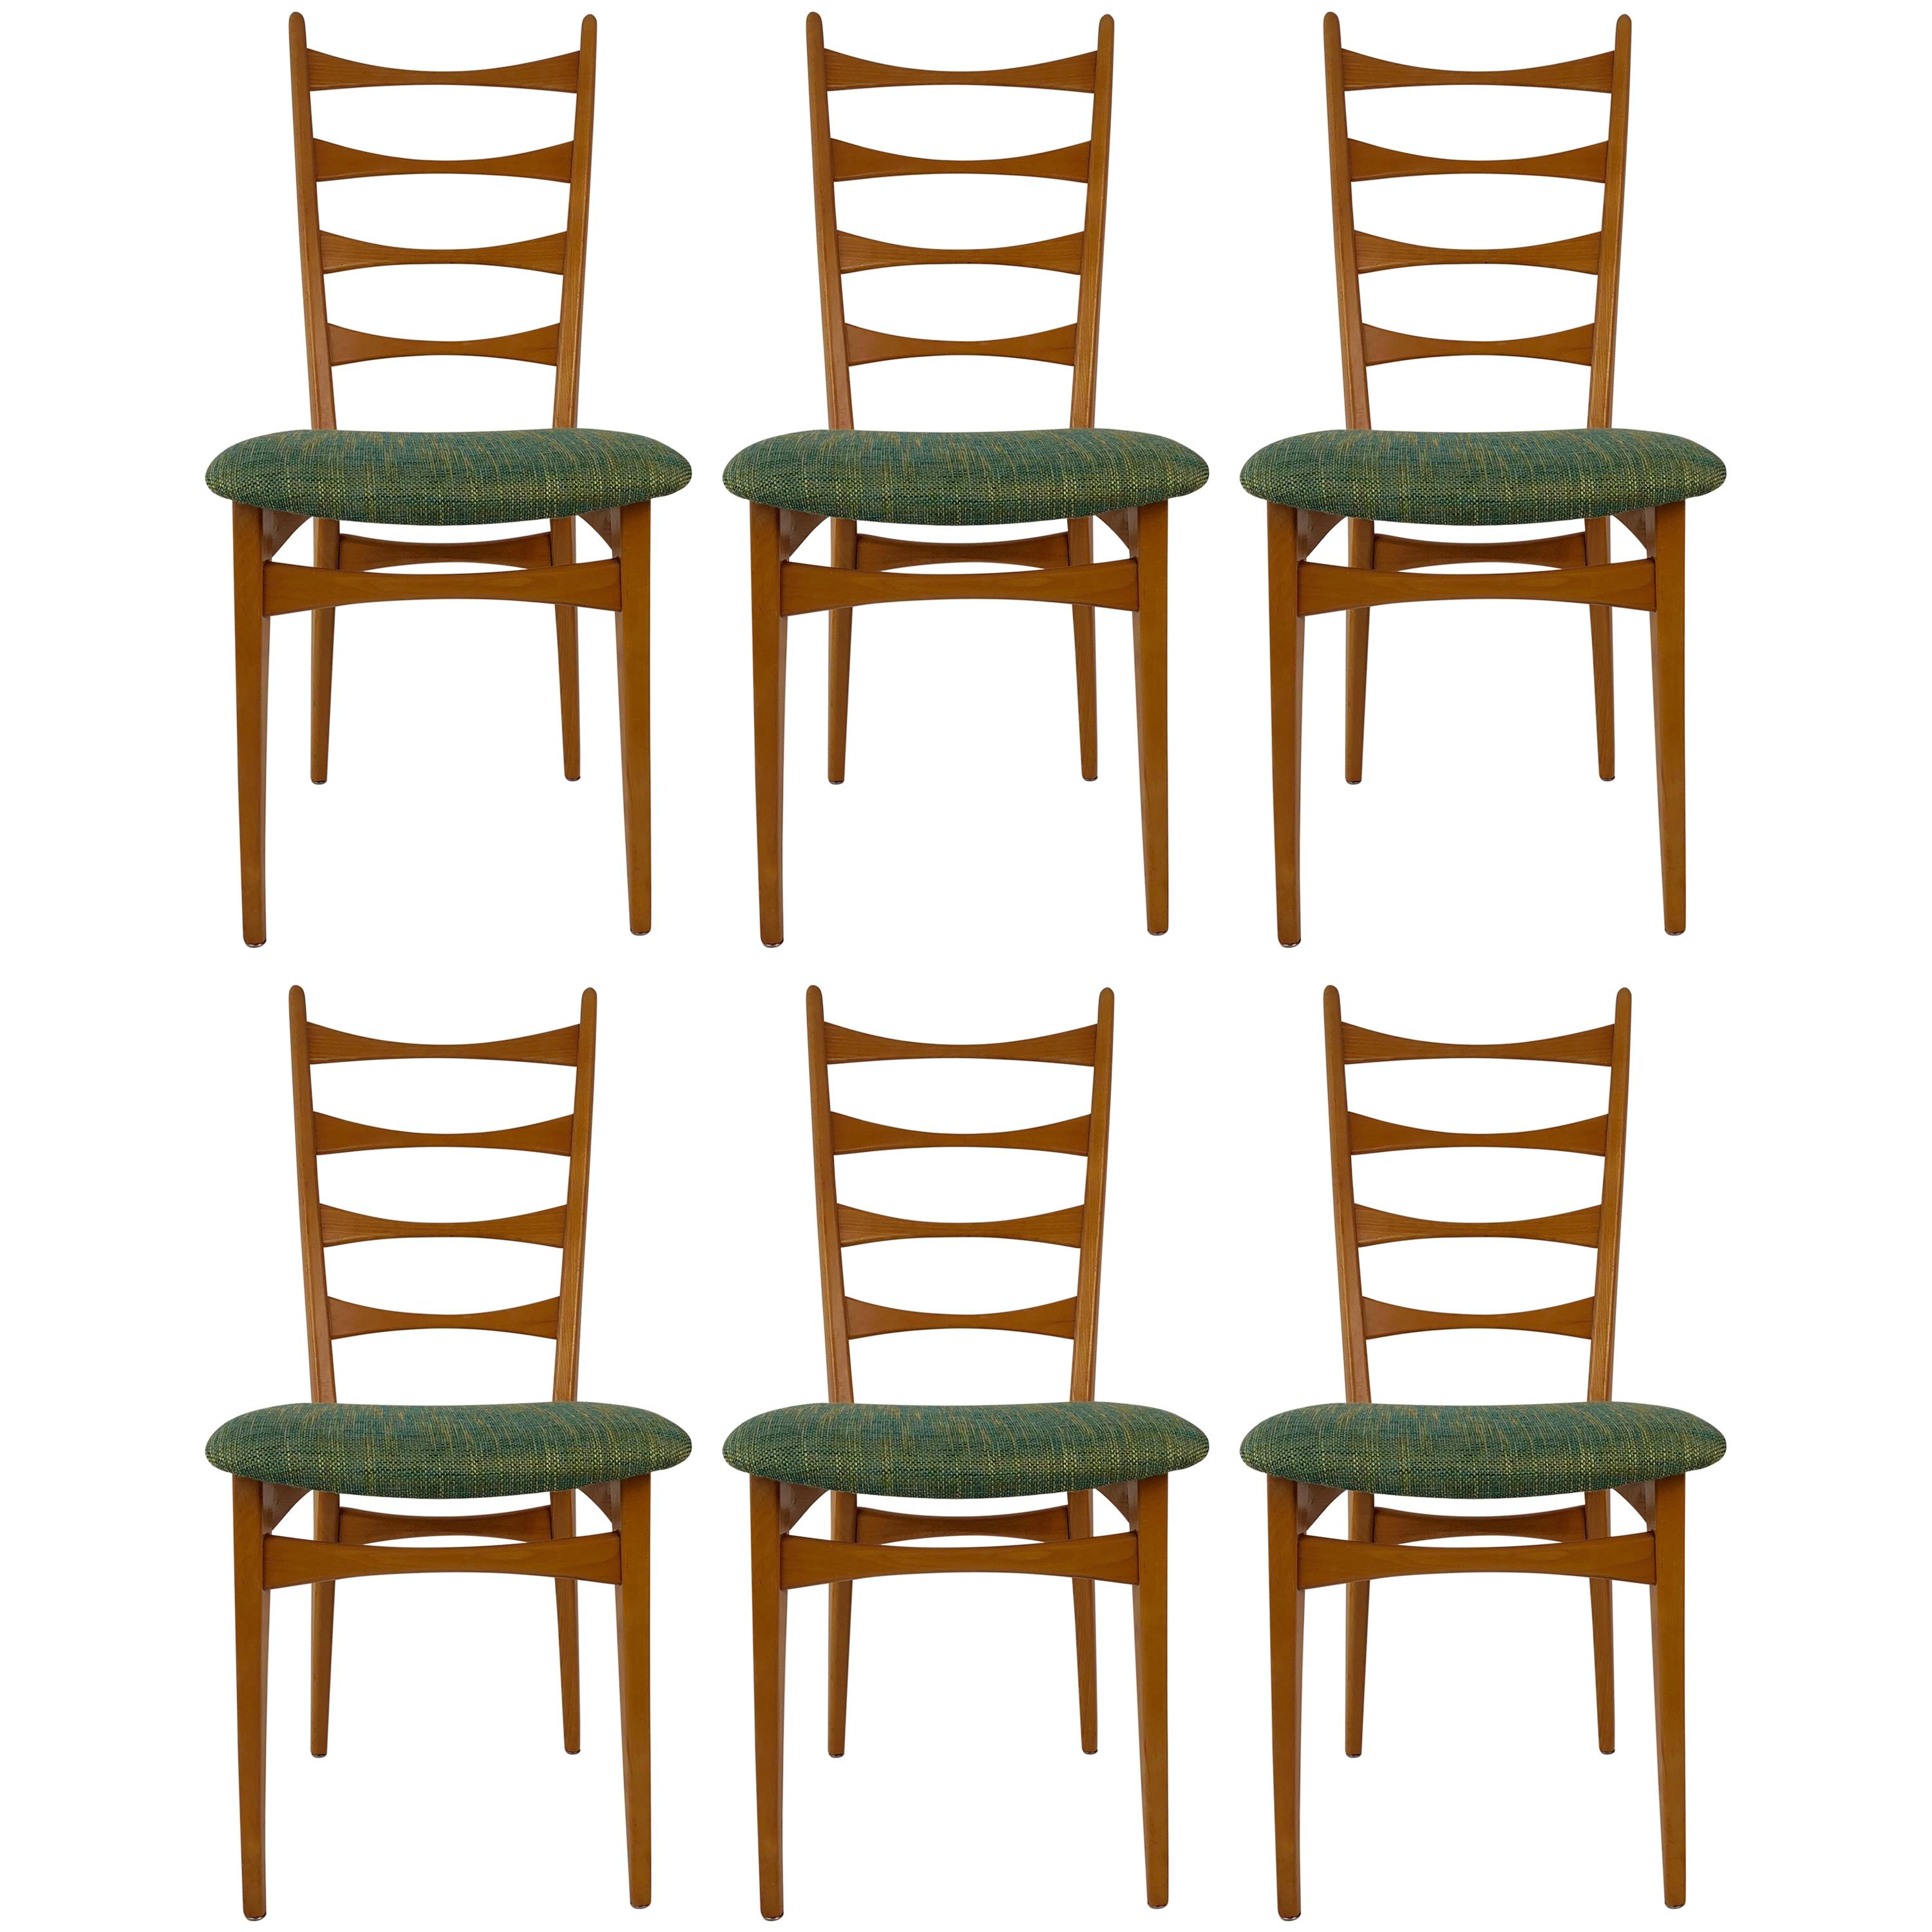 Six Danish Modern Midcentury Ladder Back Dinning Chairs For Sale